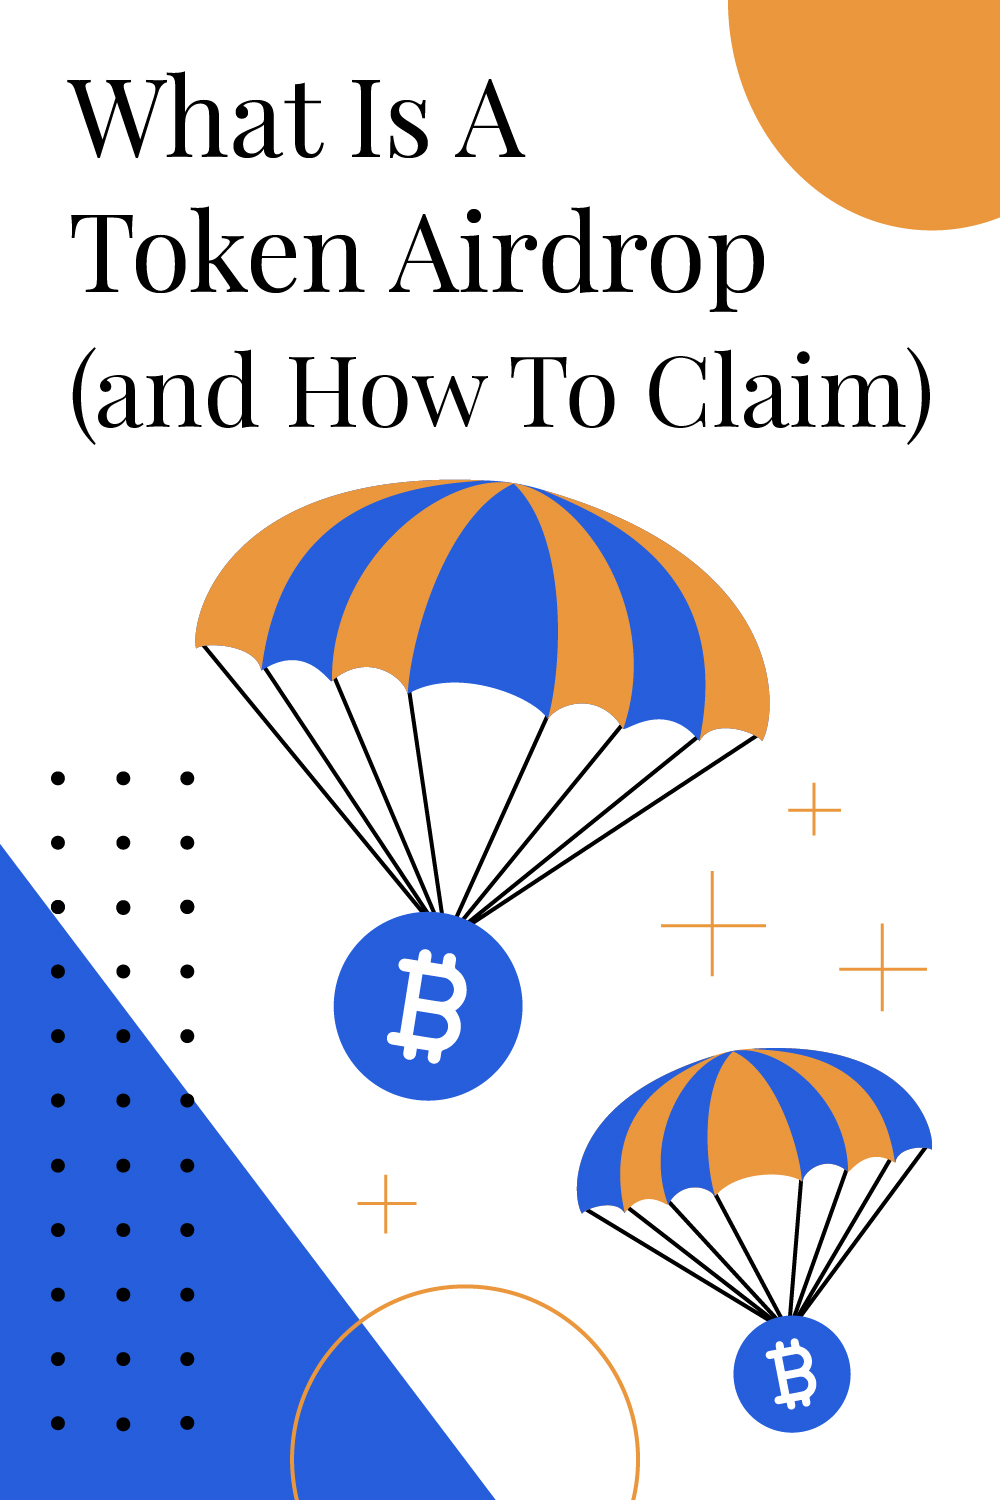 What Is A Token Airdrop (And How To Claim It)